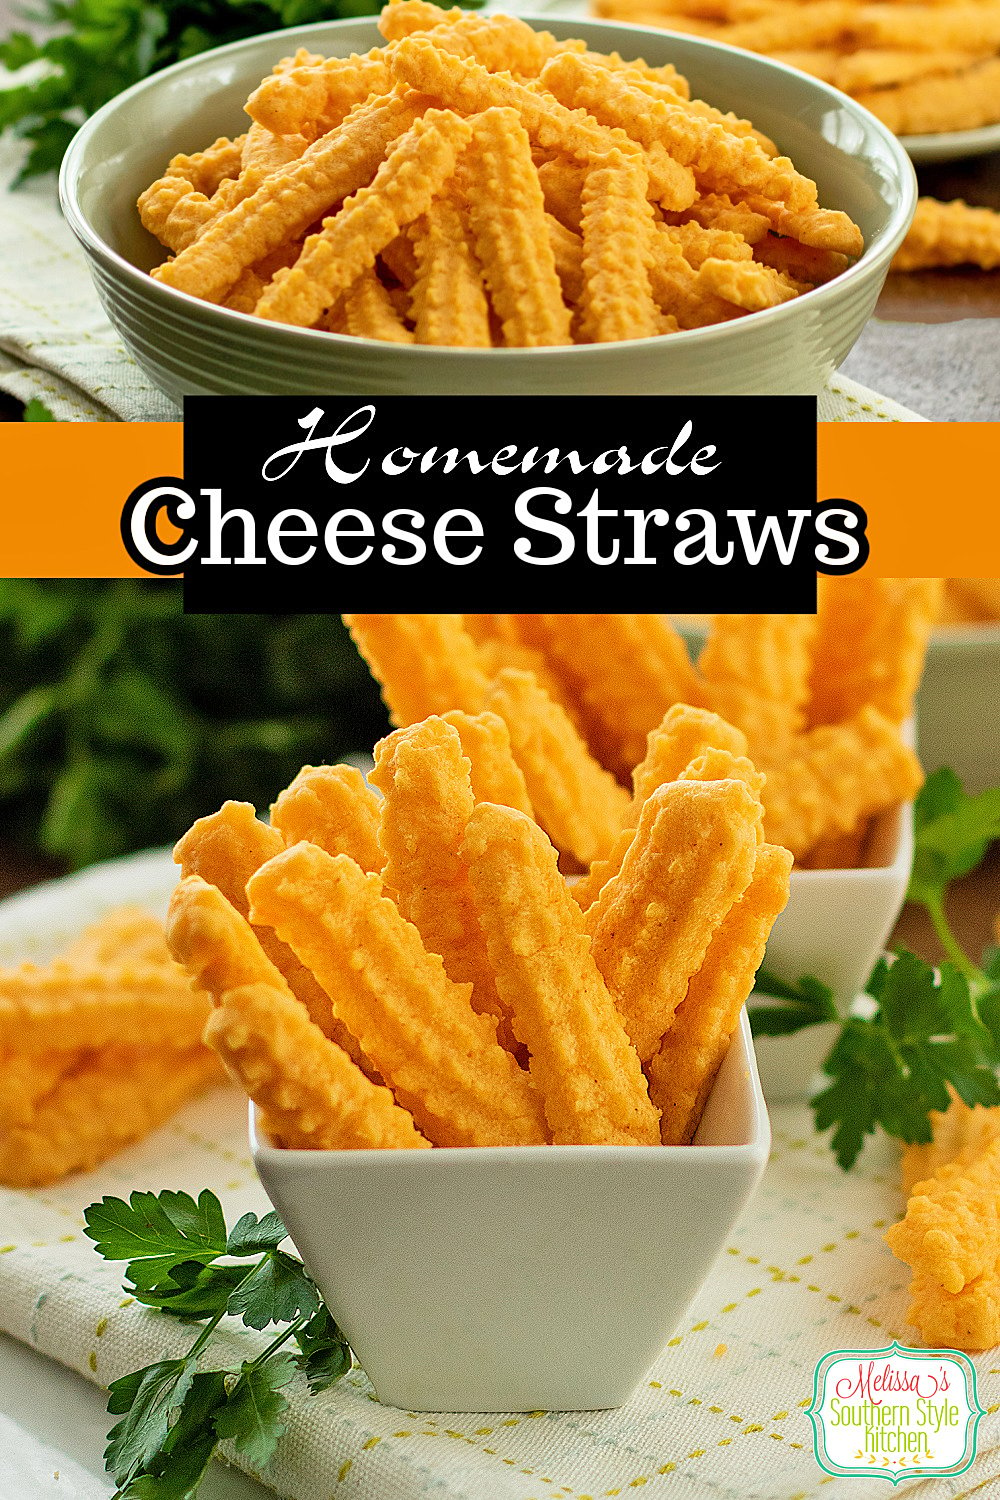 This Cheddar Cheese Straws Recipe is quick and easy turning simple ingredients into a delicious little snack for parties and get togethers #cheesestrawsrecipe #easycheesestraws #southerncheesestraws #cheesesticks #appetizers #cheesecrackers #savoryshortbreadrecipe #cheesecrackers